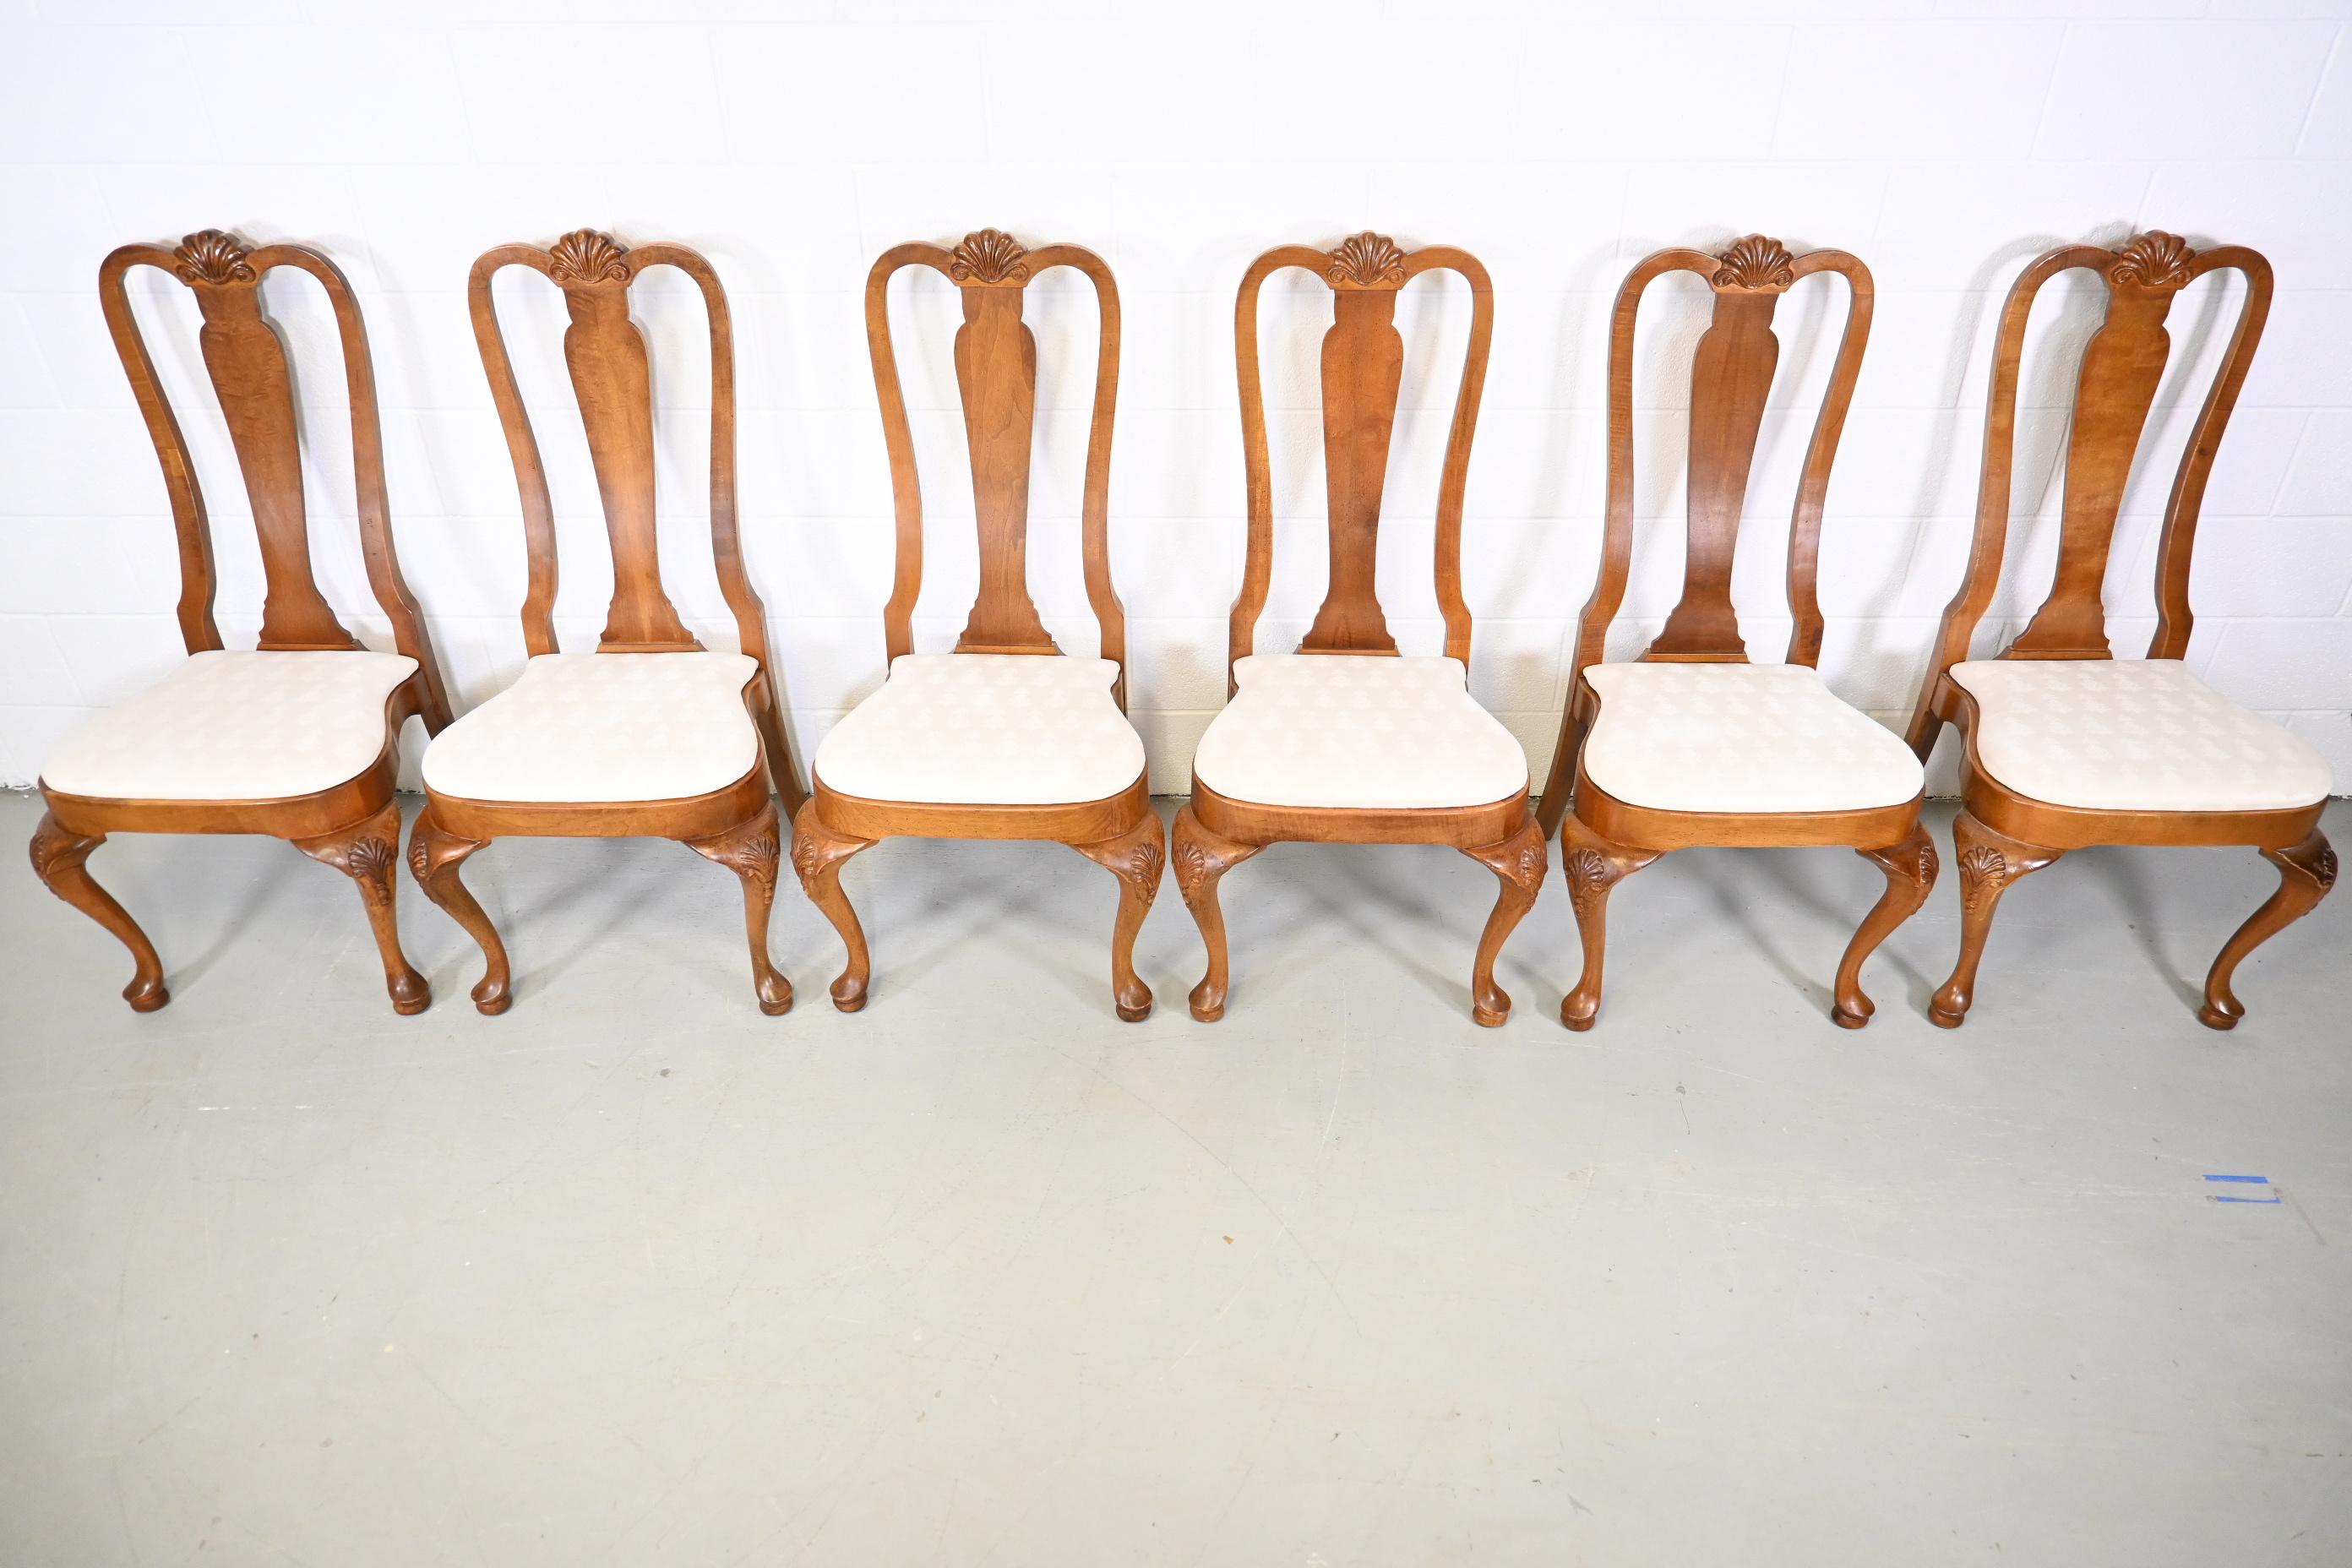 Romweber Furniture French Queen Anne style dining chairs - set of 6.

Romweber Furniture, USA, 1980s.

Measures: 22.5 wide x 18.5 deep x 44.75 high. seat height 19.5.

Solid wood french Queen Anne style chairs with ivory upholstery.

Great